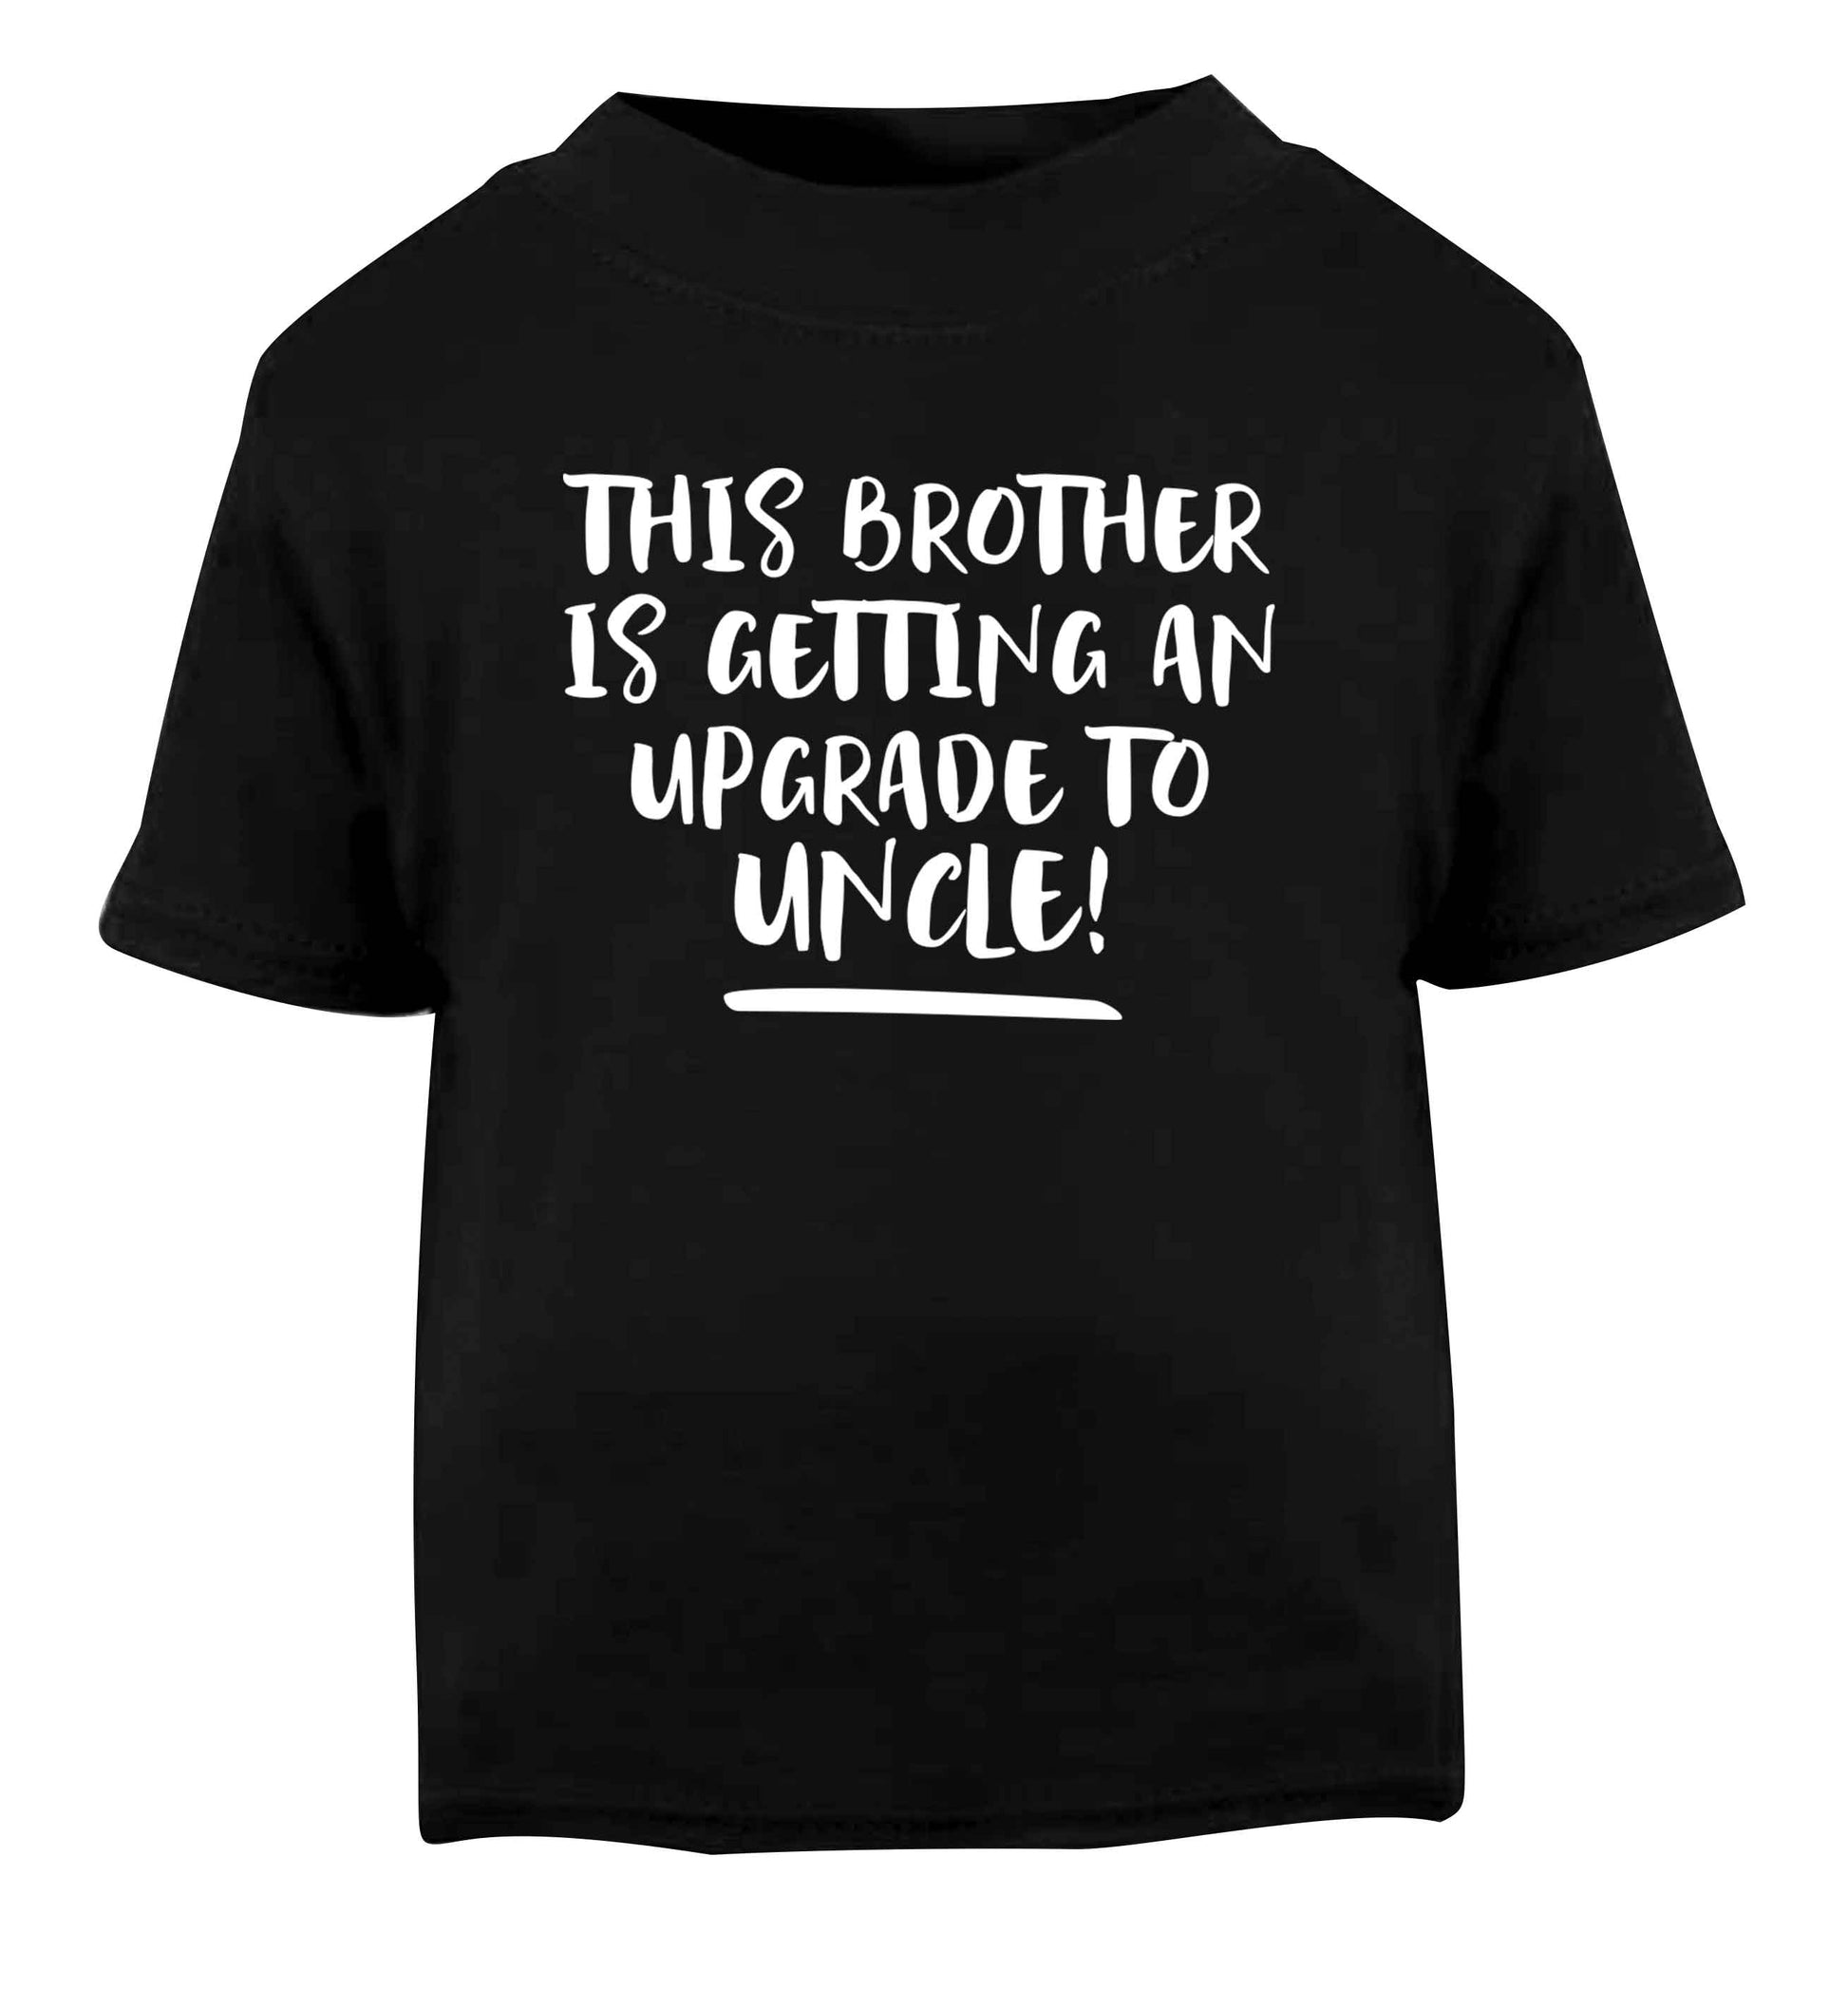 This brother is getting an upgrade to uncle! Black Baby Toddler Tshirt 2 years